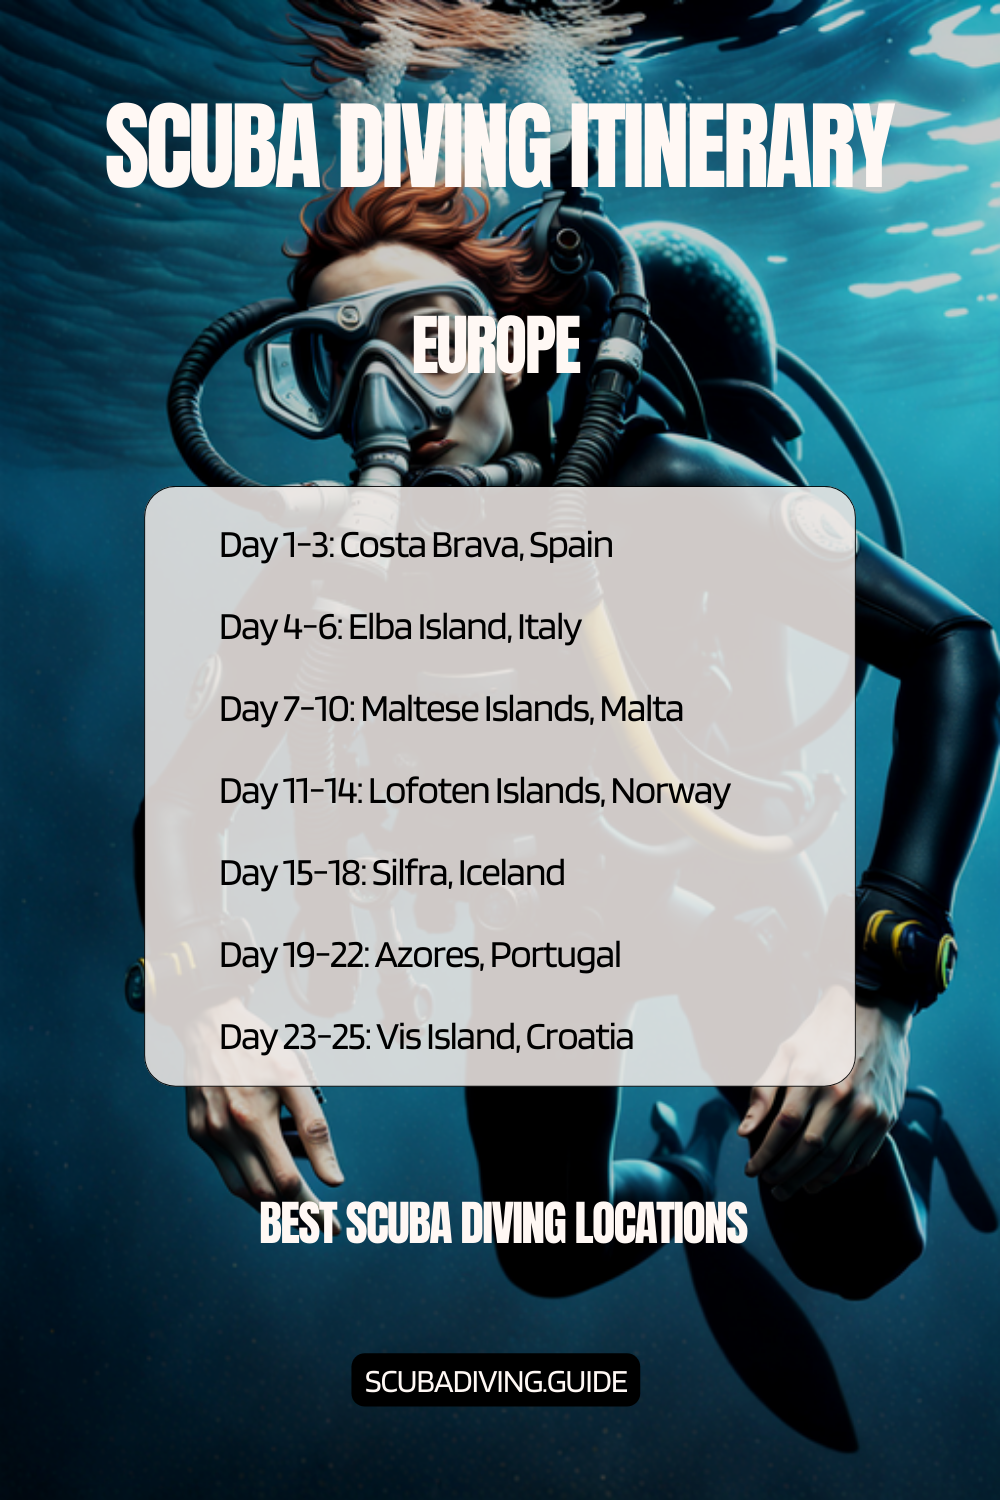 Europe Recommended Scuba Diving Itinerary